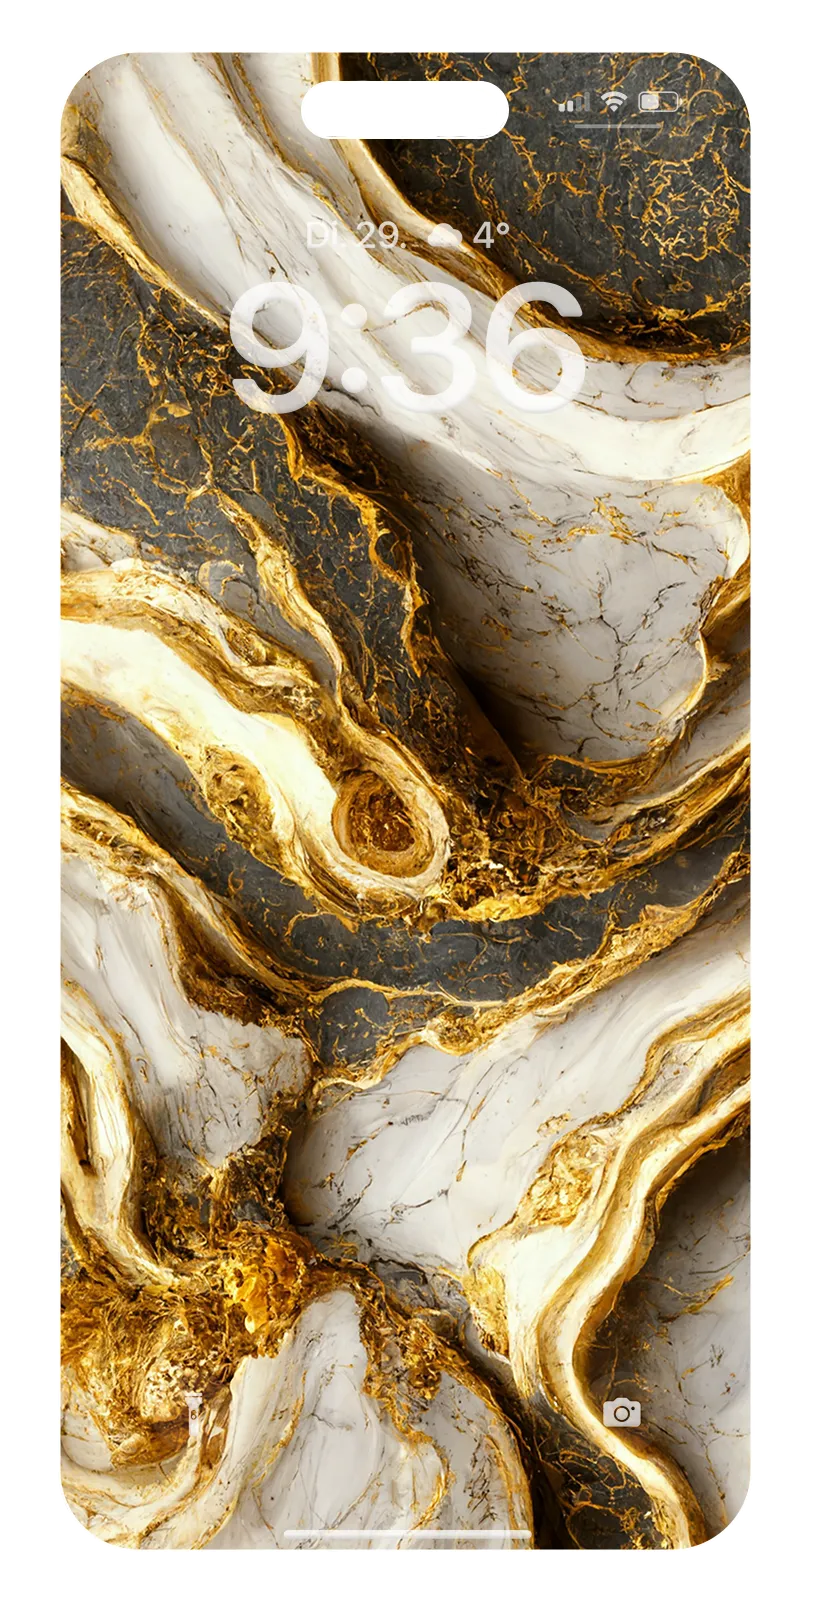 The best free high resolution 4k luxury background collections for Iphone 14 pro Max, Iphone 14 pro, iPhone 14 Plus, iPhone SE,
iPhone 13 Pro Max, iPhone 13 Pro, iPhone 13 and free wallpapers for Android, Samsung Galaxy S22 Ultra, Samsung Galaxy S22+.
Google Pixel 7 Pro.
Oppo Find X5 Pro.
Google Pixel 7.
Honor Magic4 Pro 5G.
Xiaomi 12T Pro.
Xiaomi 12T 5G.
3d illustration, abstract, architecture, art, backdrop, background, black, brush, business, card, creative, design, elegant, flow, fluid art, glitter, glow, gold, golden, gradient, graphic, gray, ink, invitation, light, liquid, luxury, marble, marbling, metallic, modern, natural, nature, paint, pattern, shiny, simple, splash, stone, surface, swirl, texture, textured, vintage, wall, wallpaper, water, watercolor, wedding, white